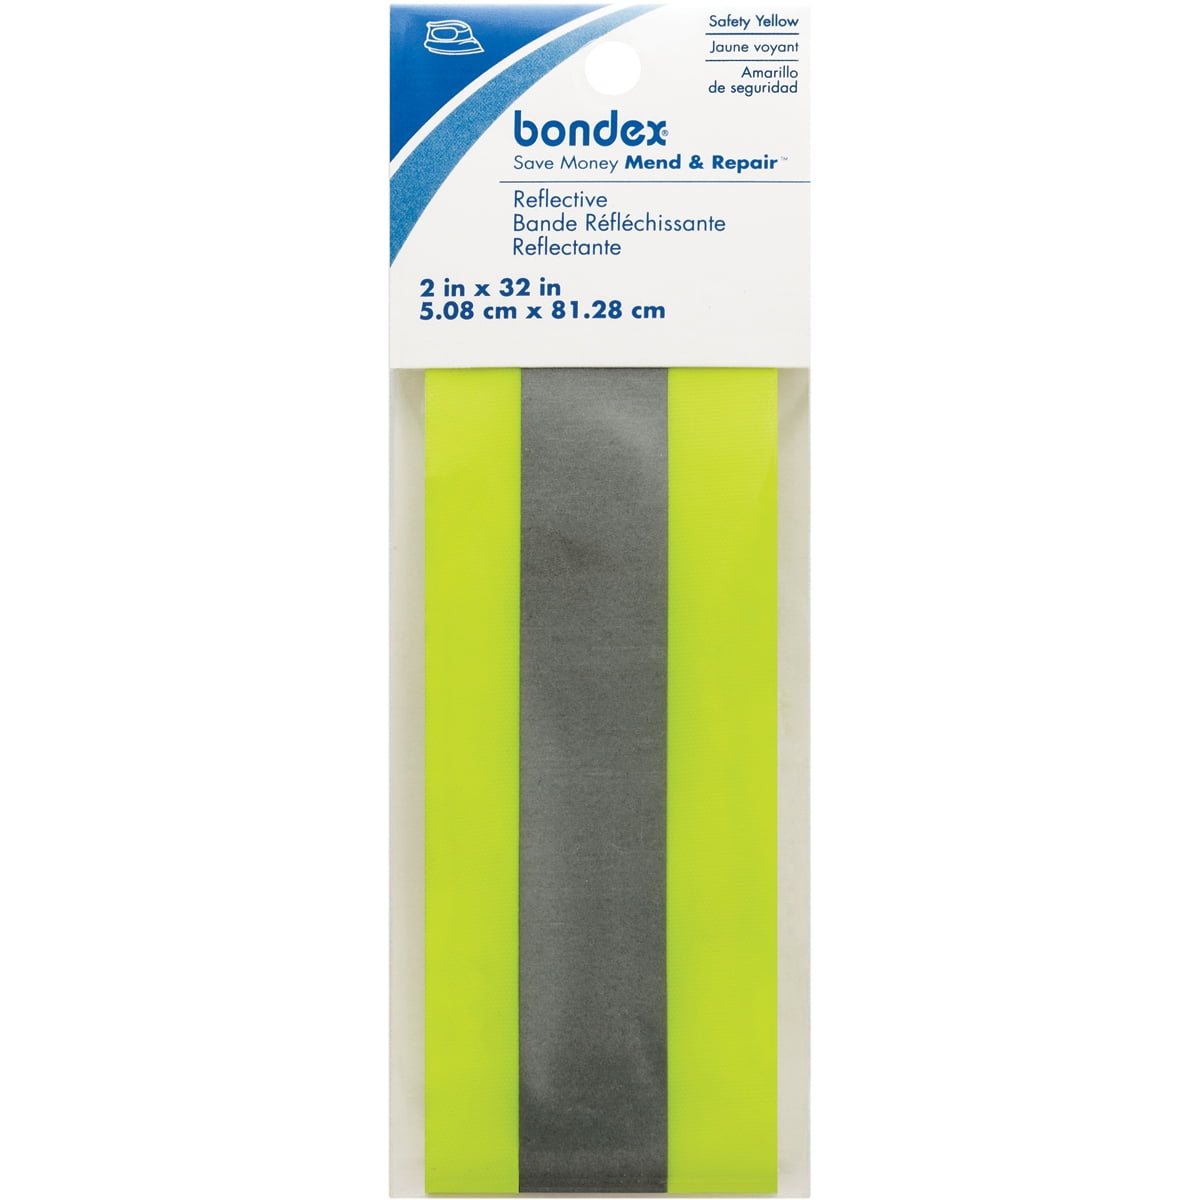 Iron-on Hi Vis Fluorescent Reflective Material Tape for Clothing